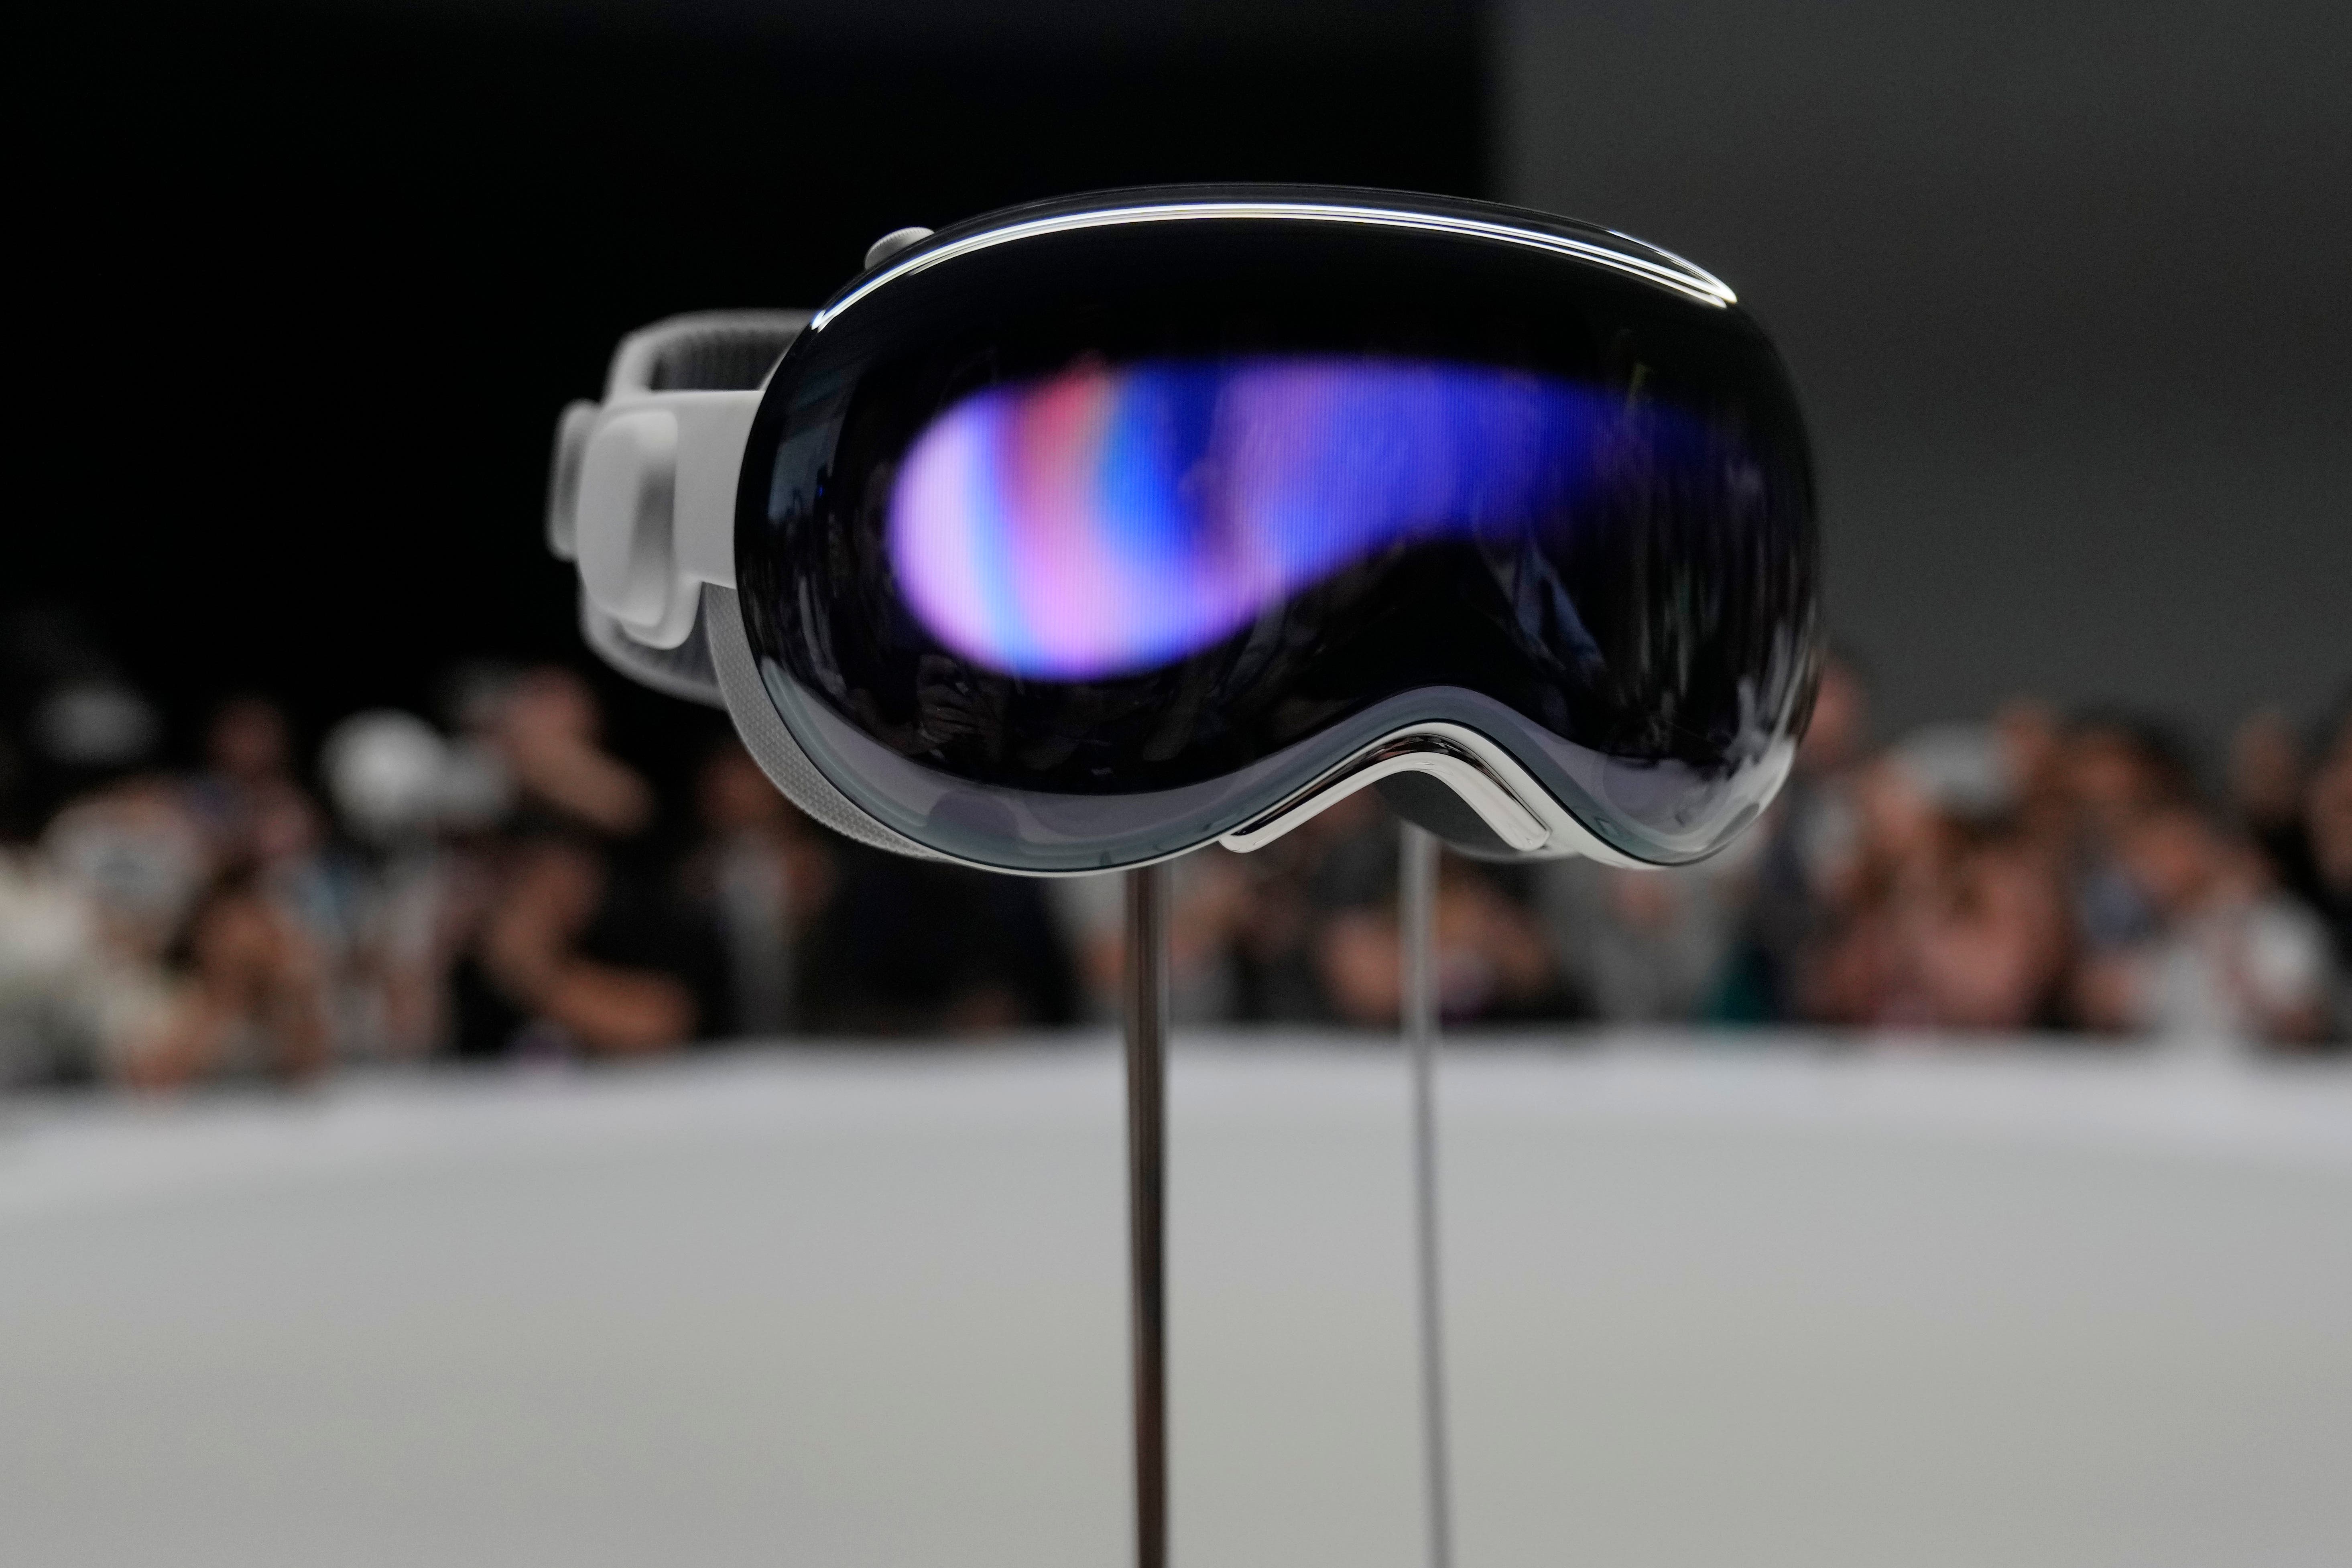 The Apple Vision Pro headset is displayed in a showroom on the Apple campus in Cupertino, California (AP Photo/Jeff Chiu)